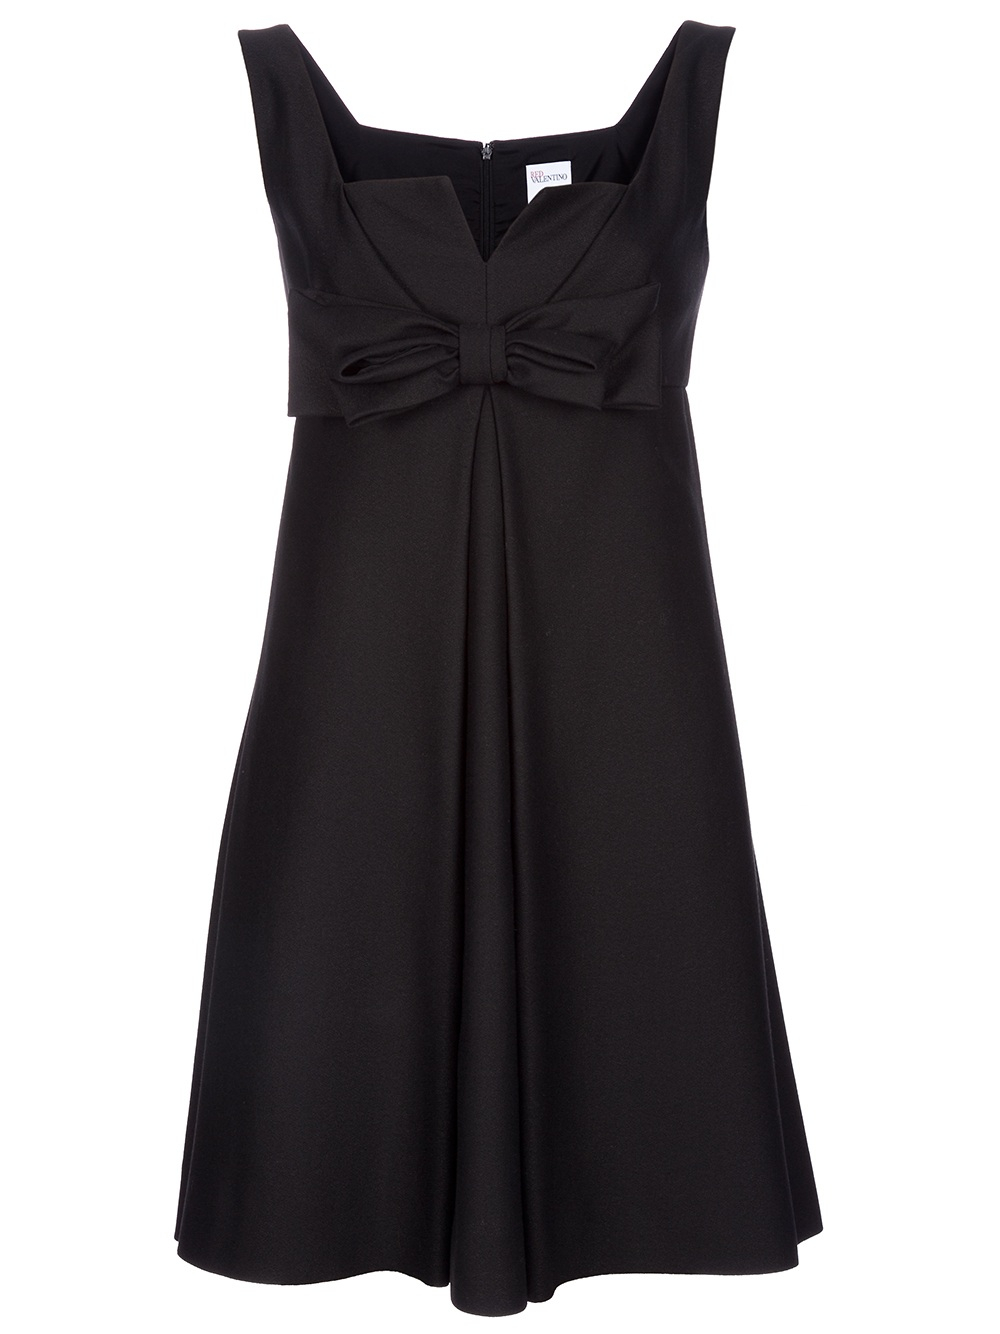 Lyst - Red Valentino Bow Detail Dress in Black